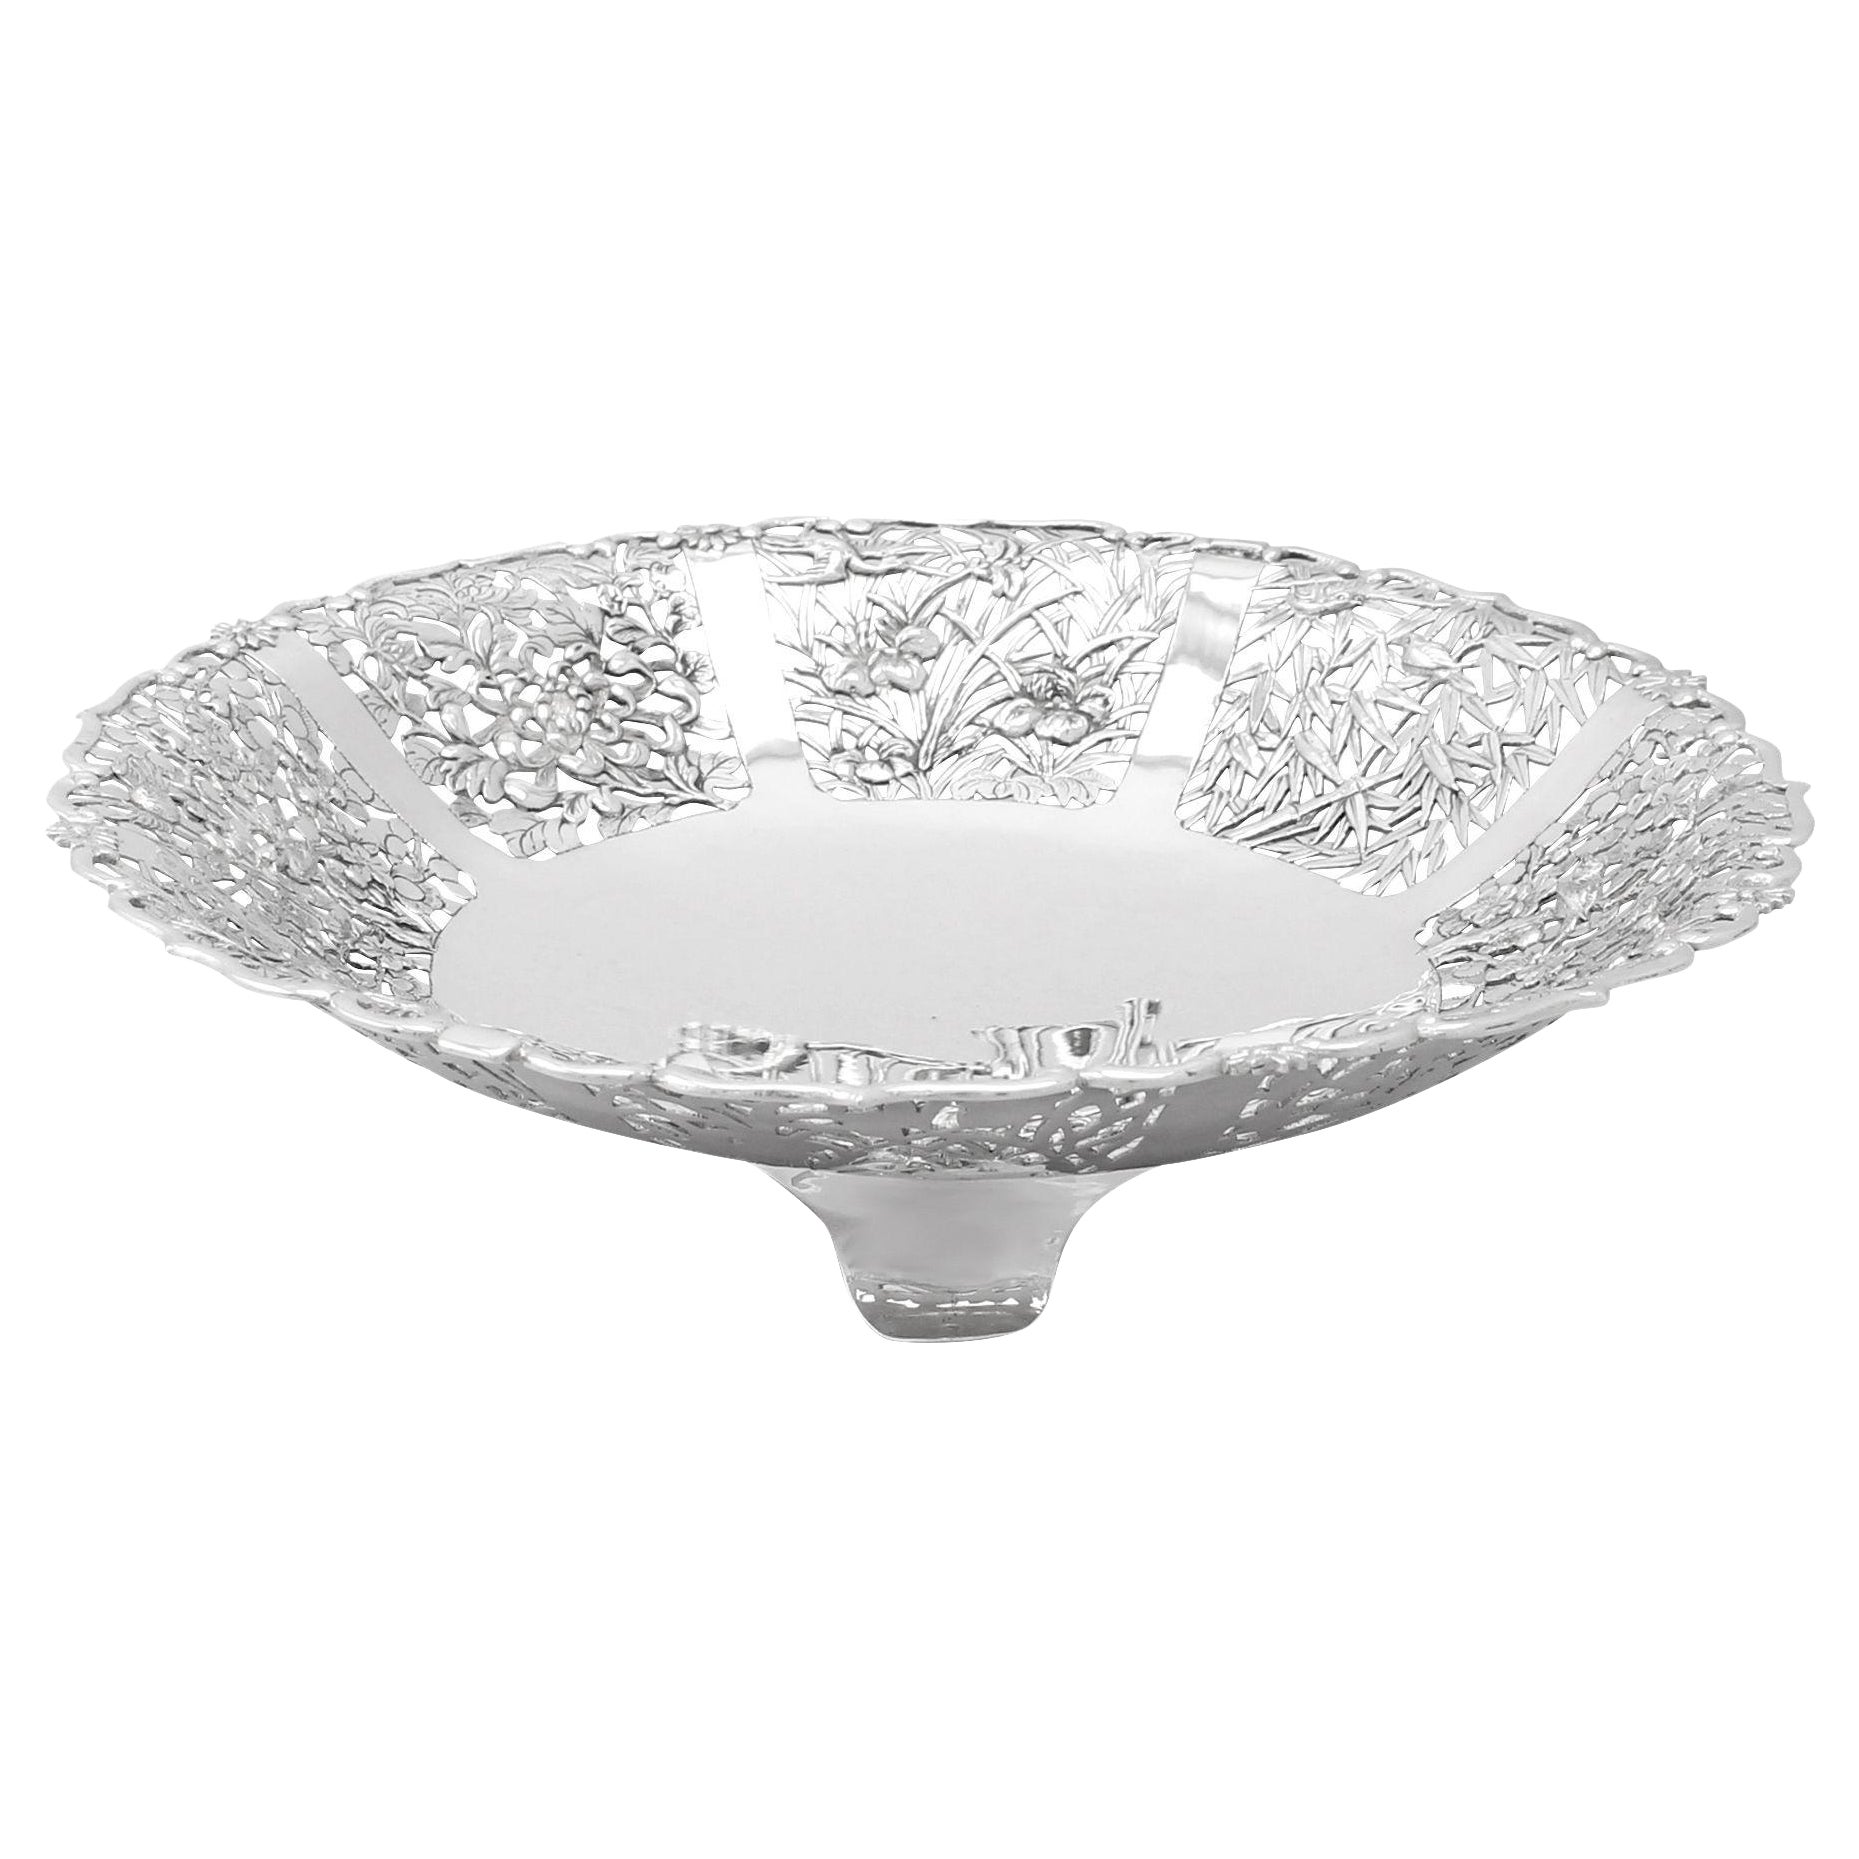 Antique 1880s Chinese Export Silver Fruit Dish (plat à fruits)